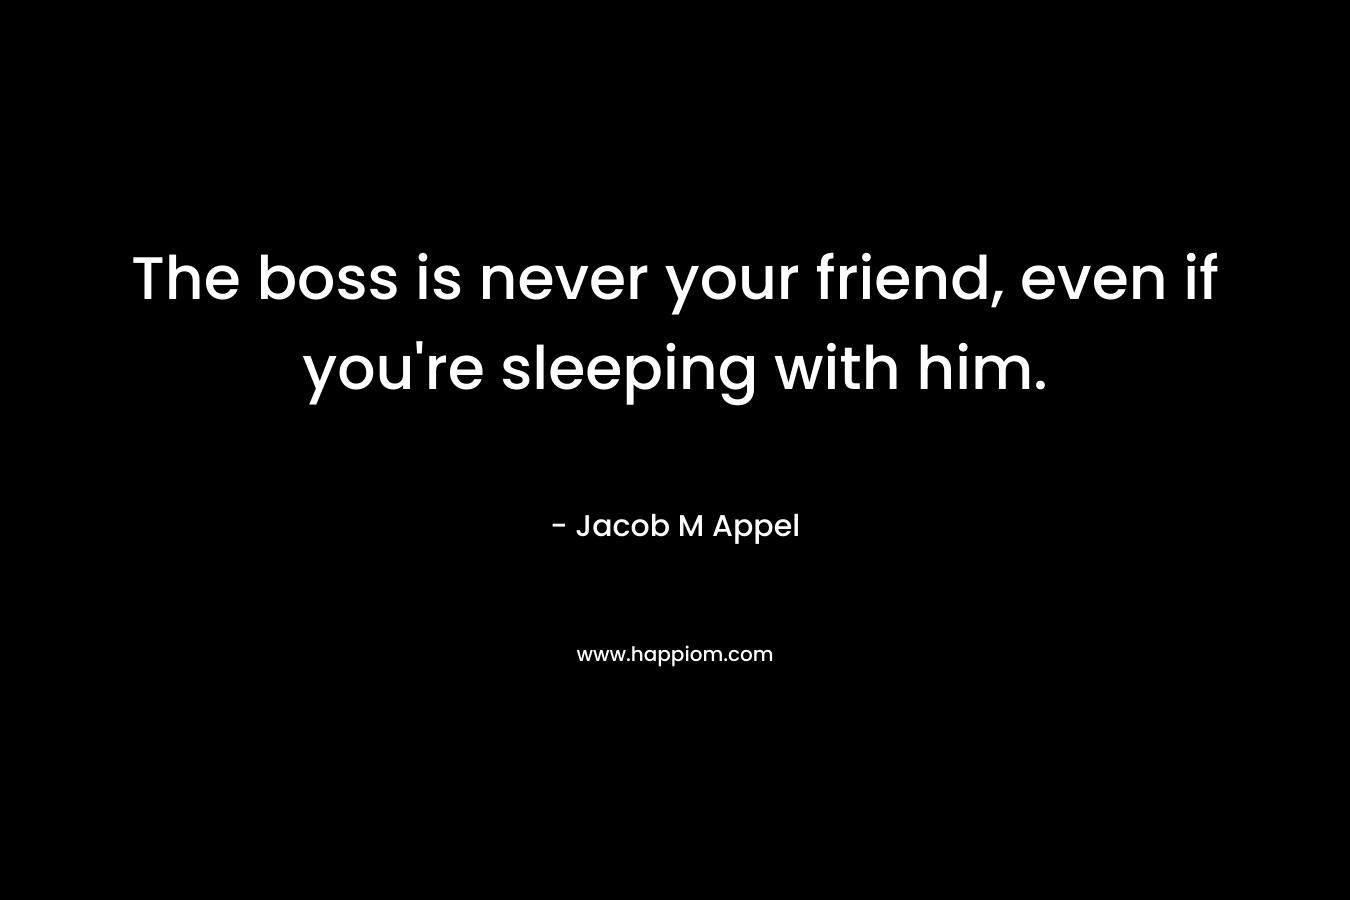 The boss is never your friend, even if you’re sleeping with him. – Jacob M Appel